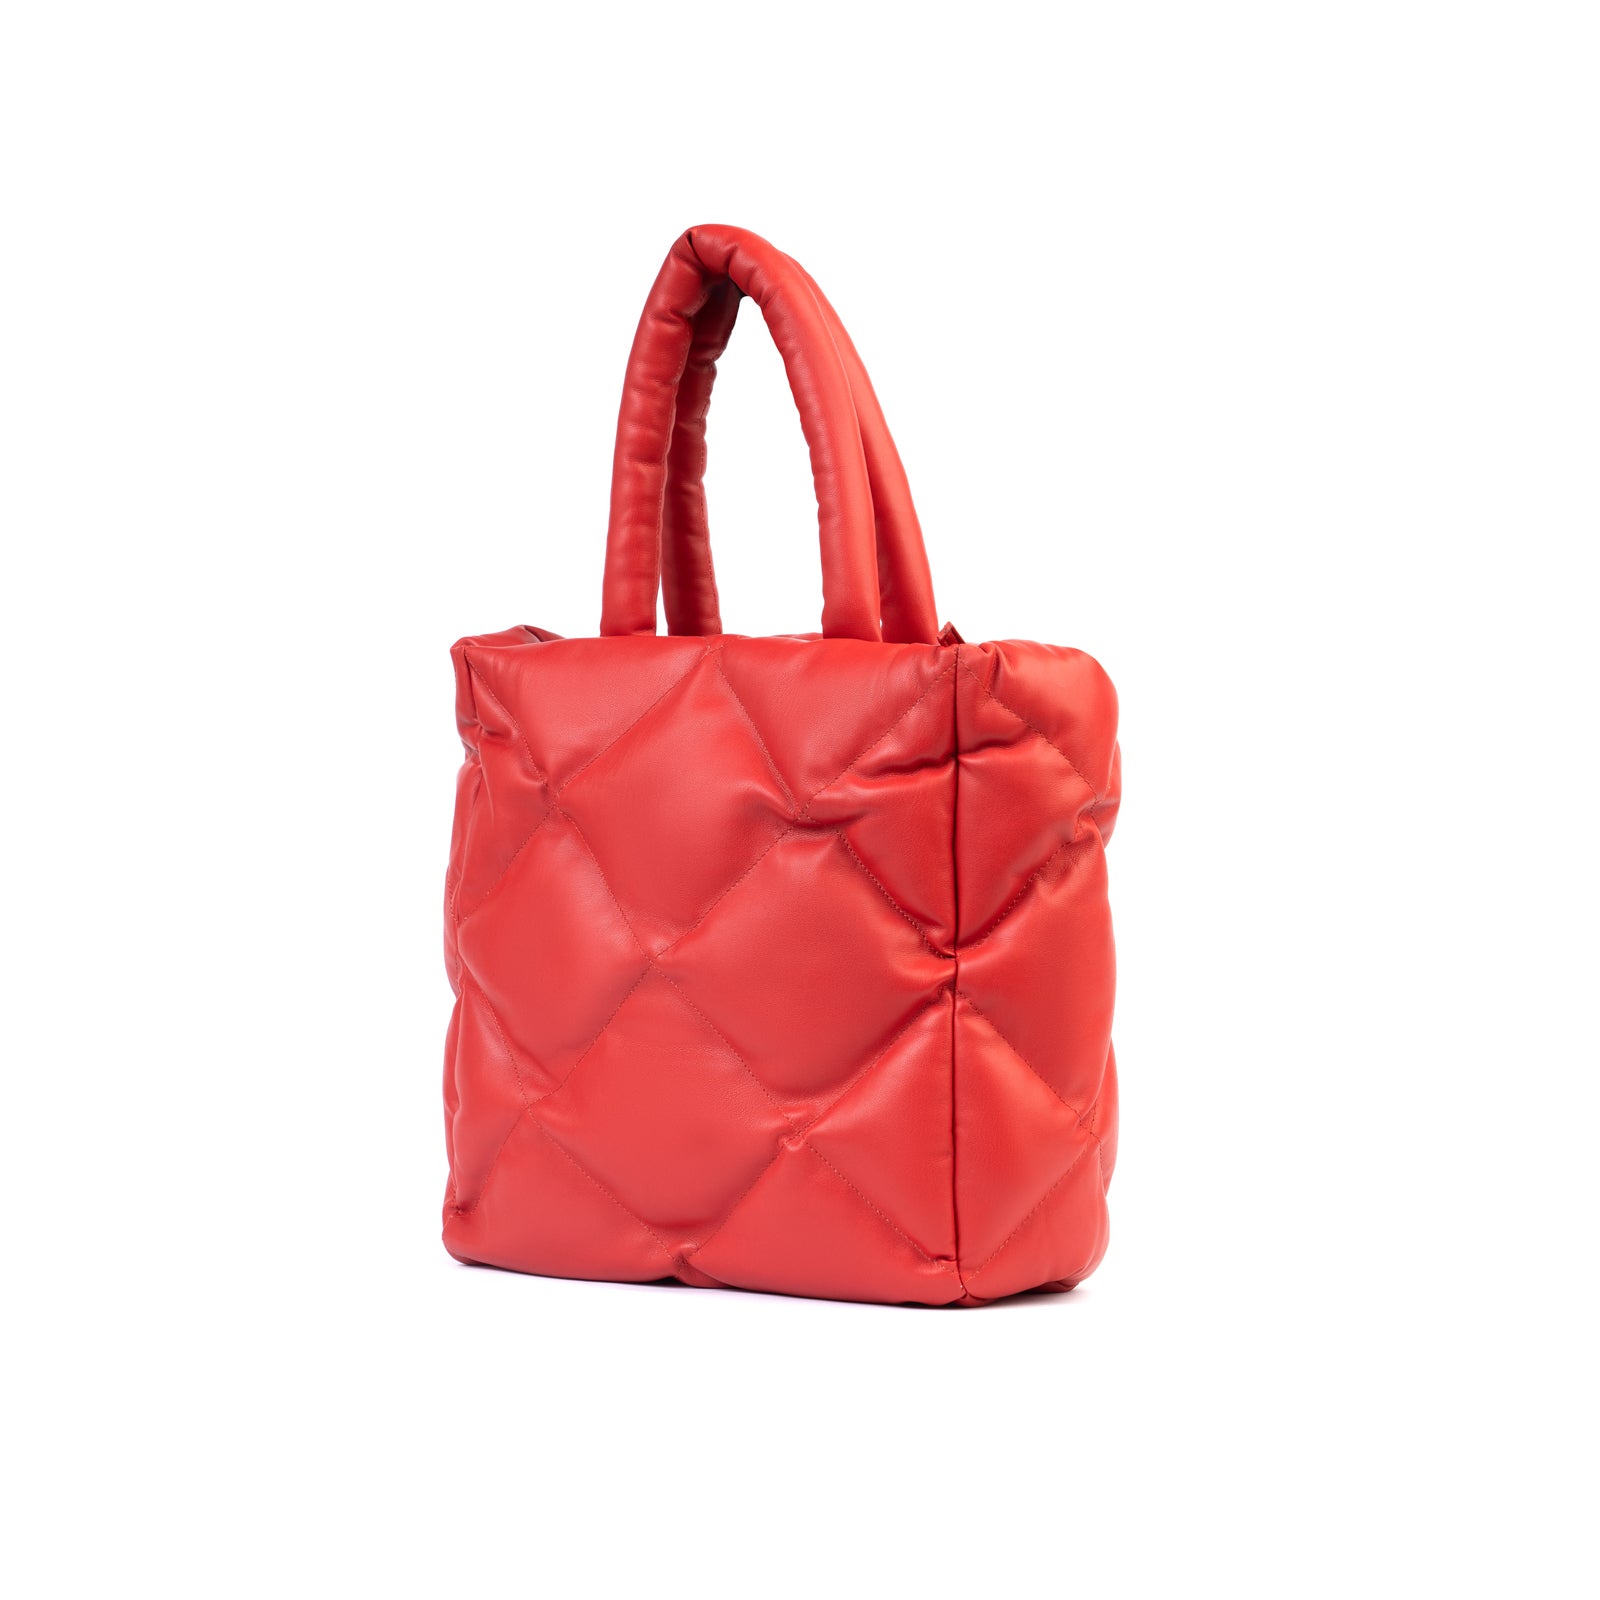 RED QUILTED TOTE BAG